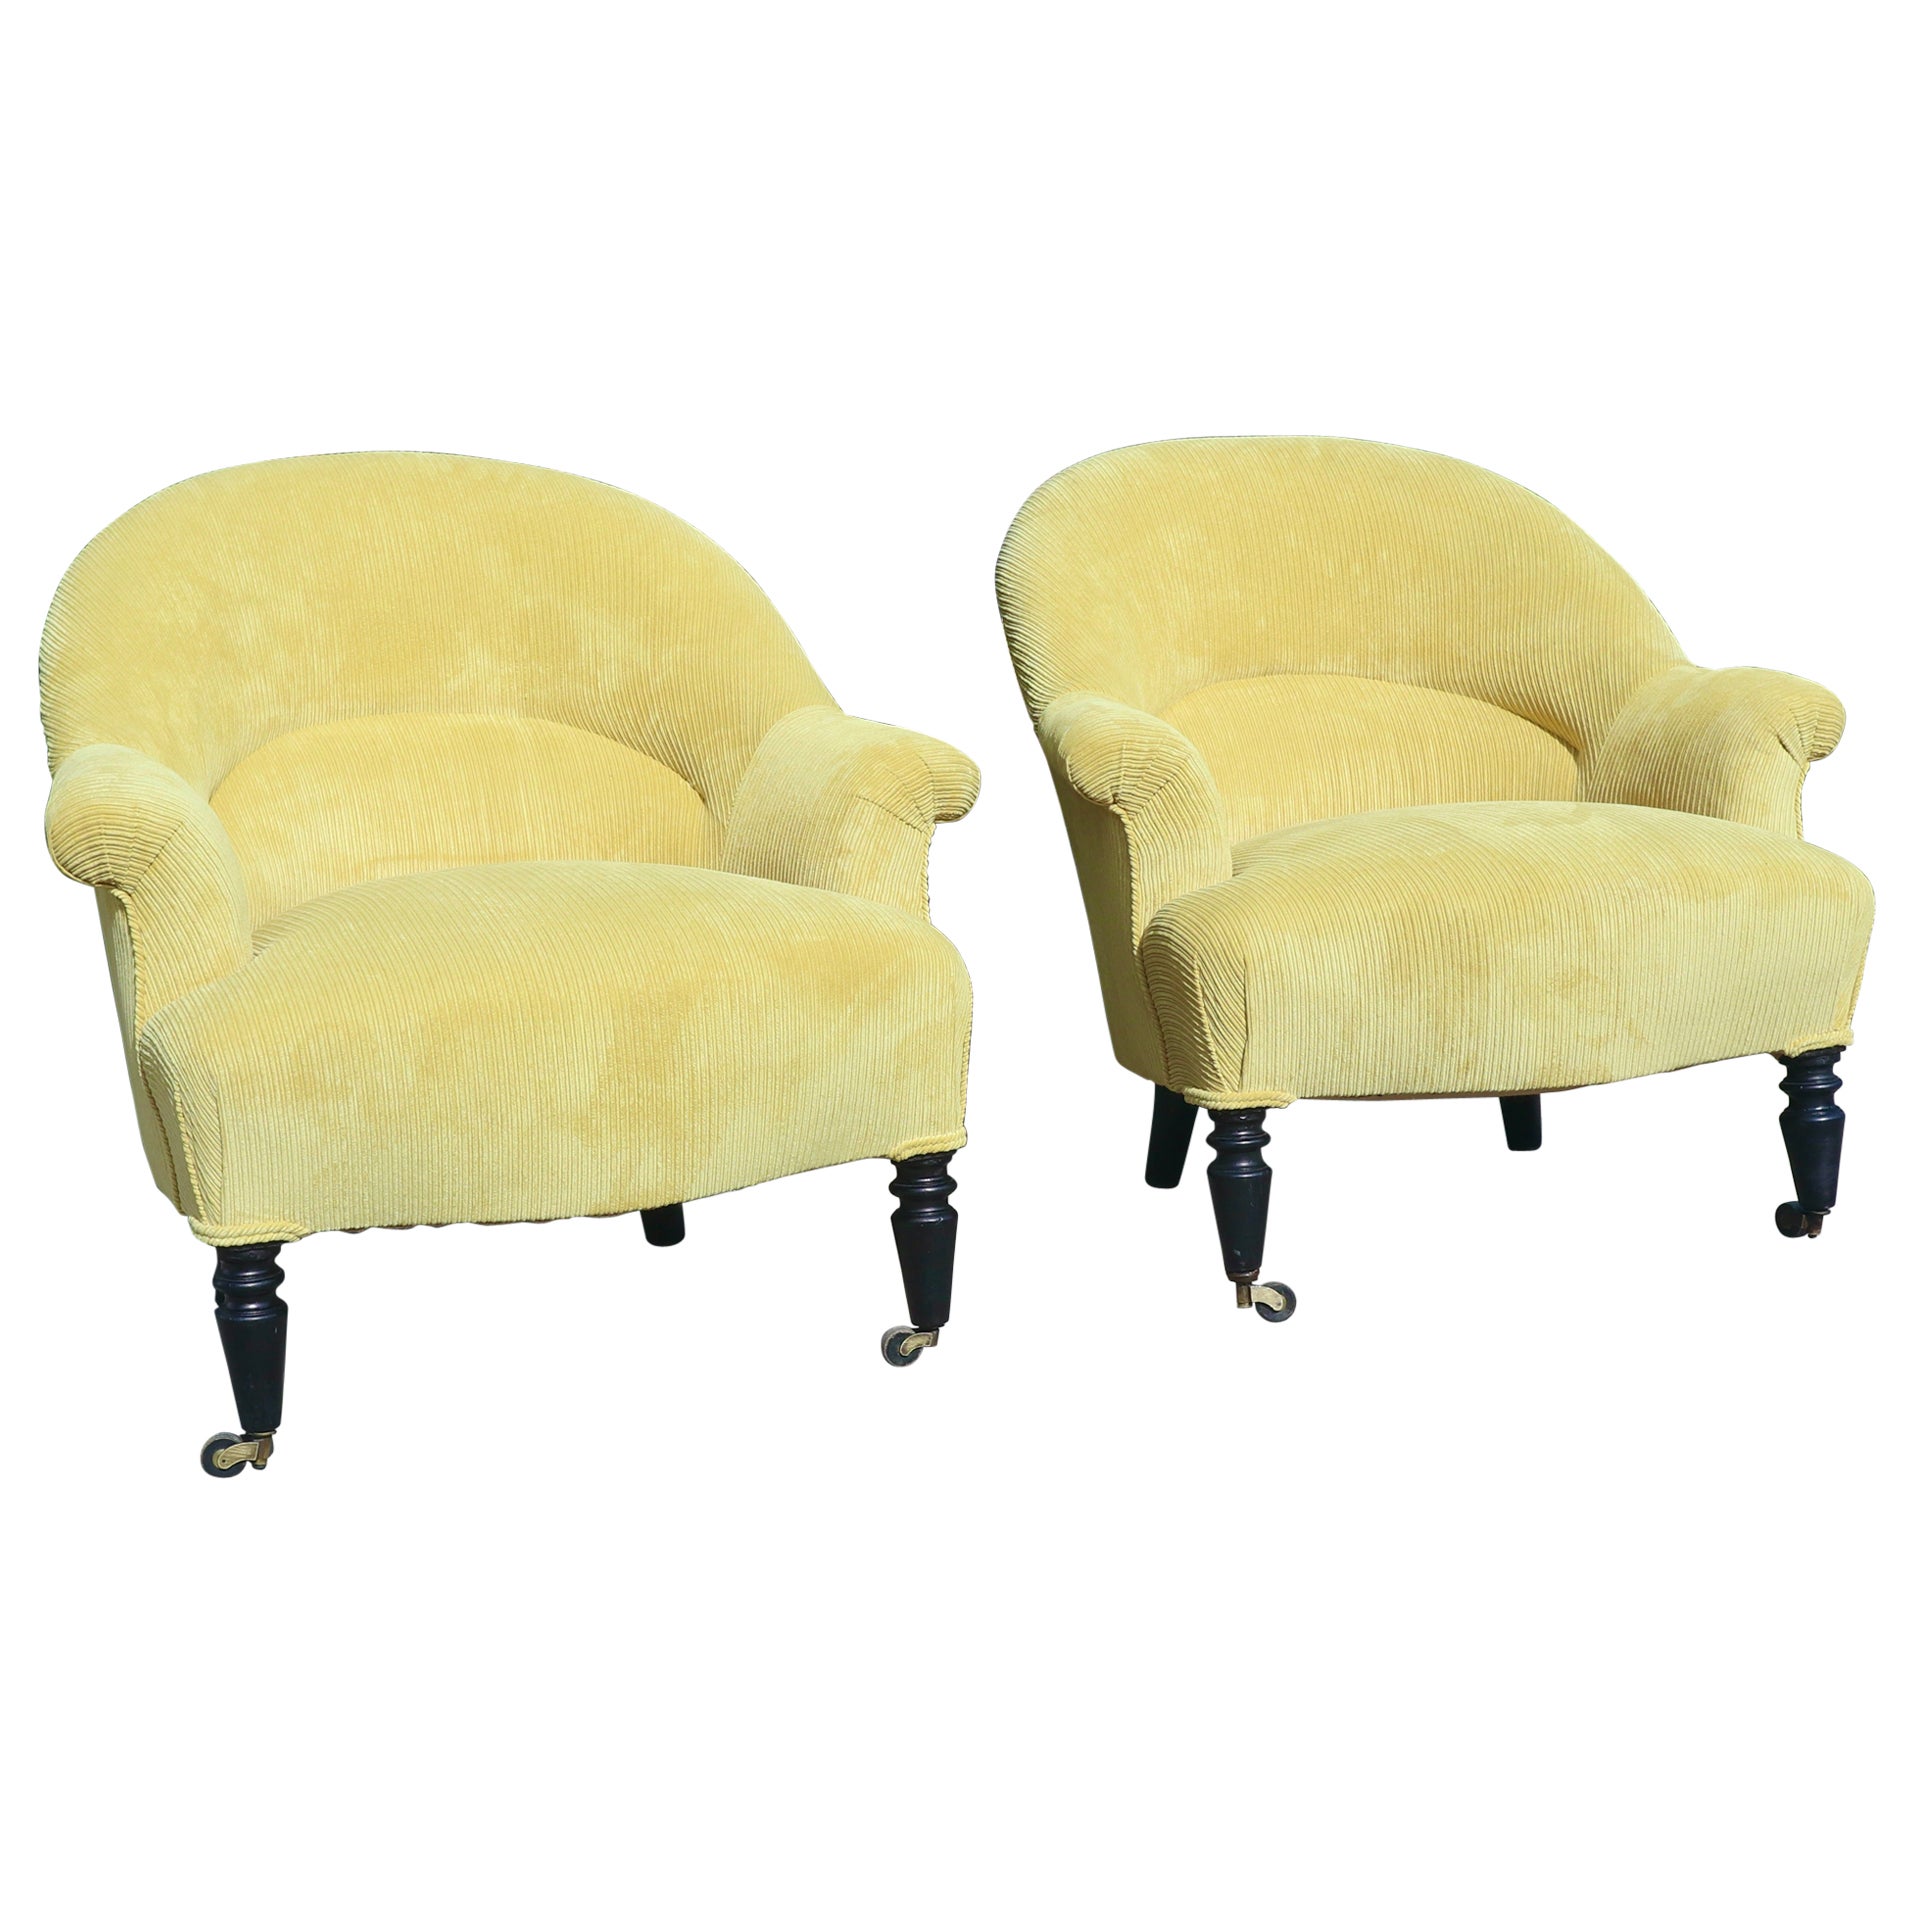  Pair of French 19th century Napoleon III crapaud armchairs in corduroy textile  For Sale